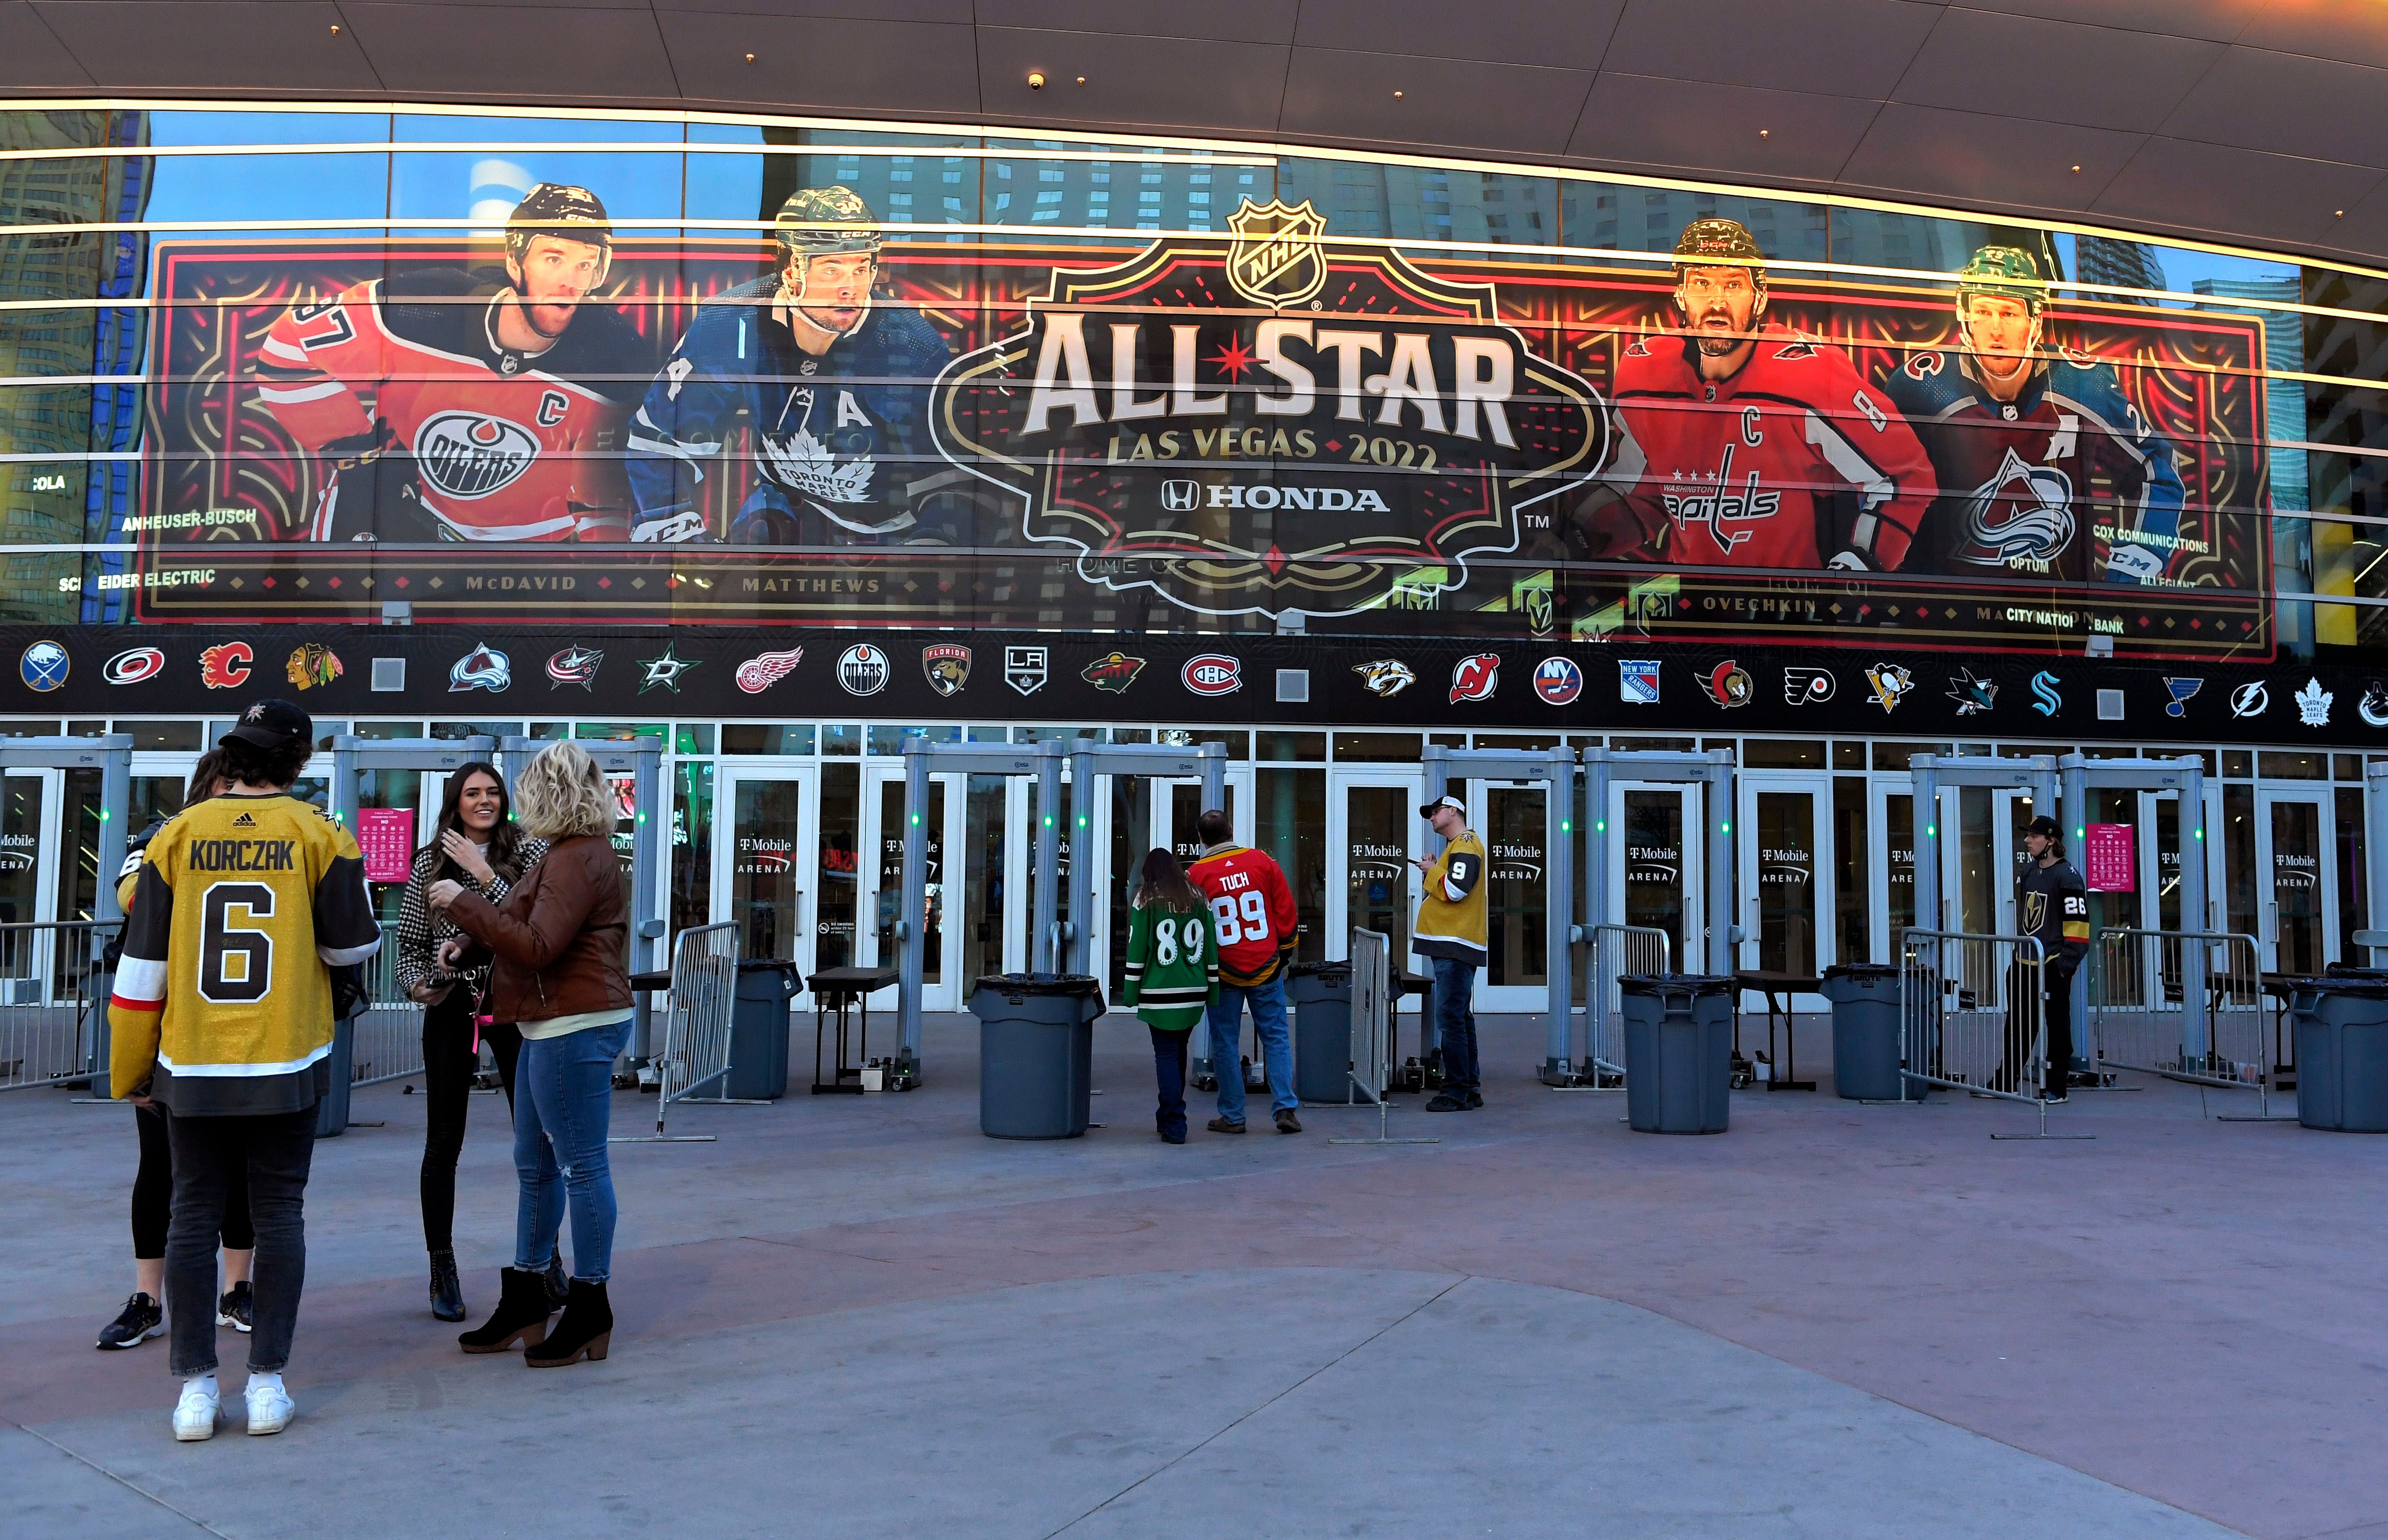 3 Ways To Improve The NHL All-Star Game